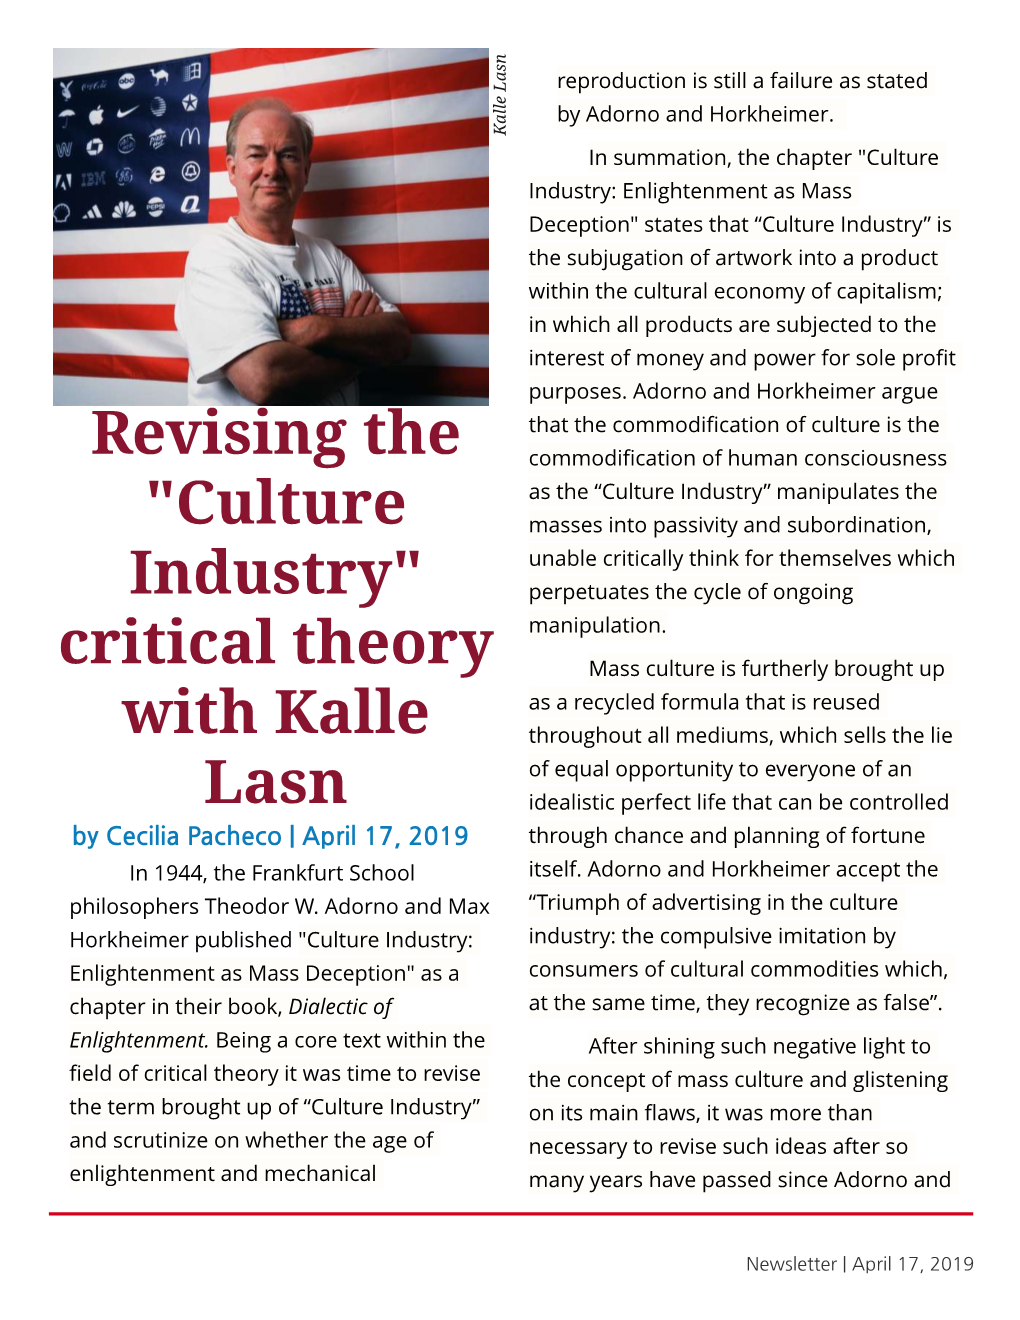 Critical Theory with Kalle Lasn